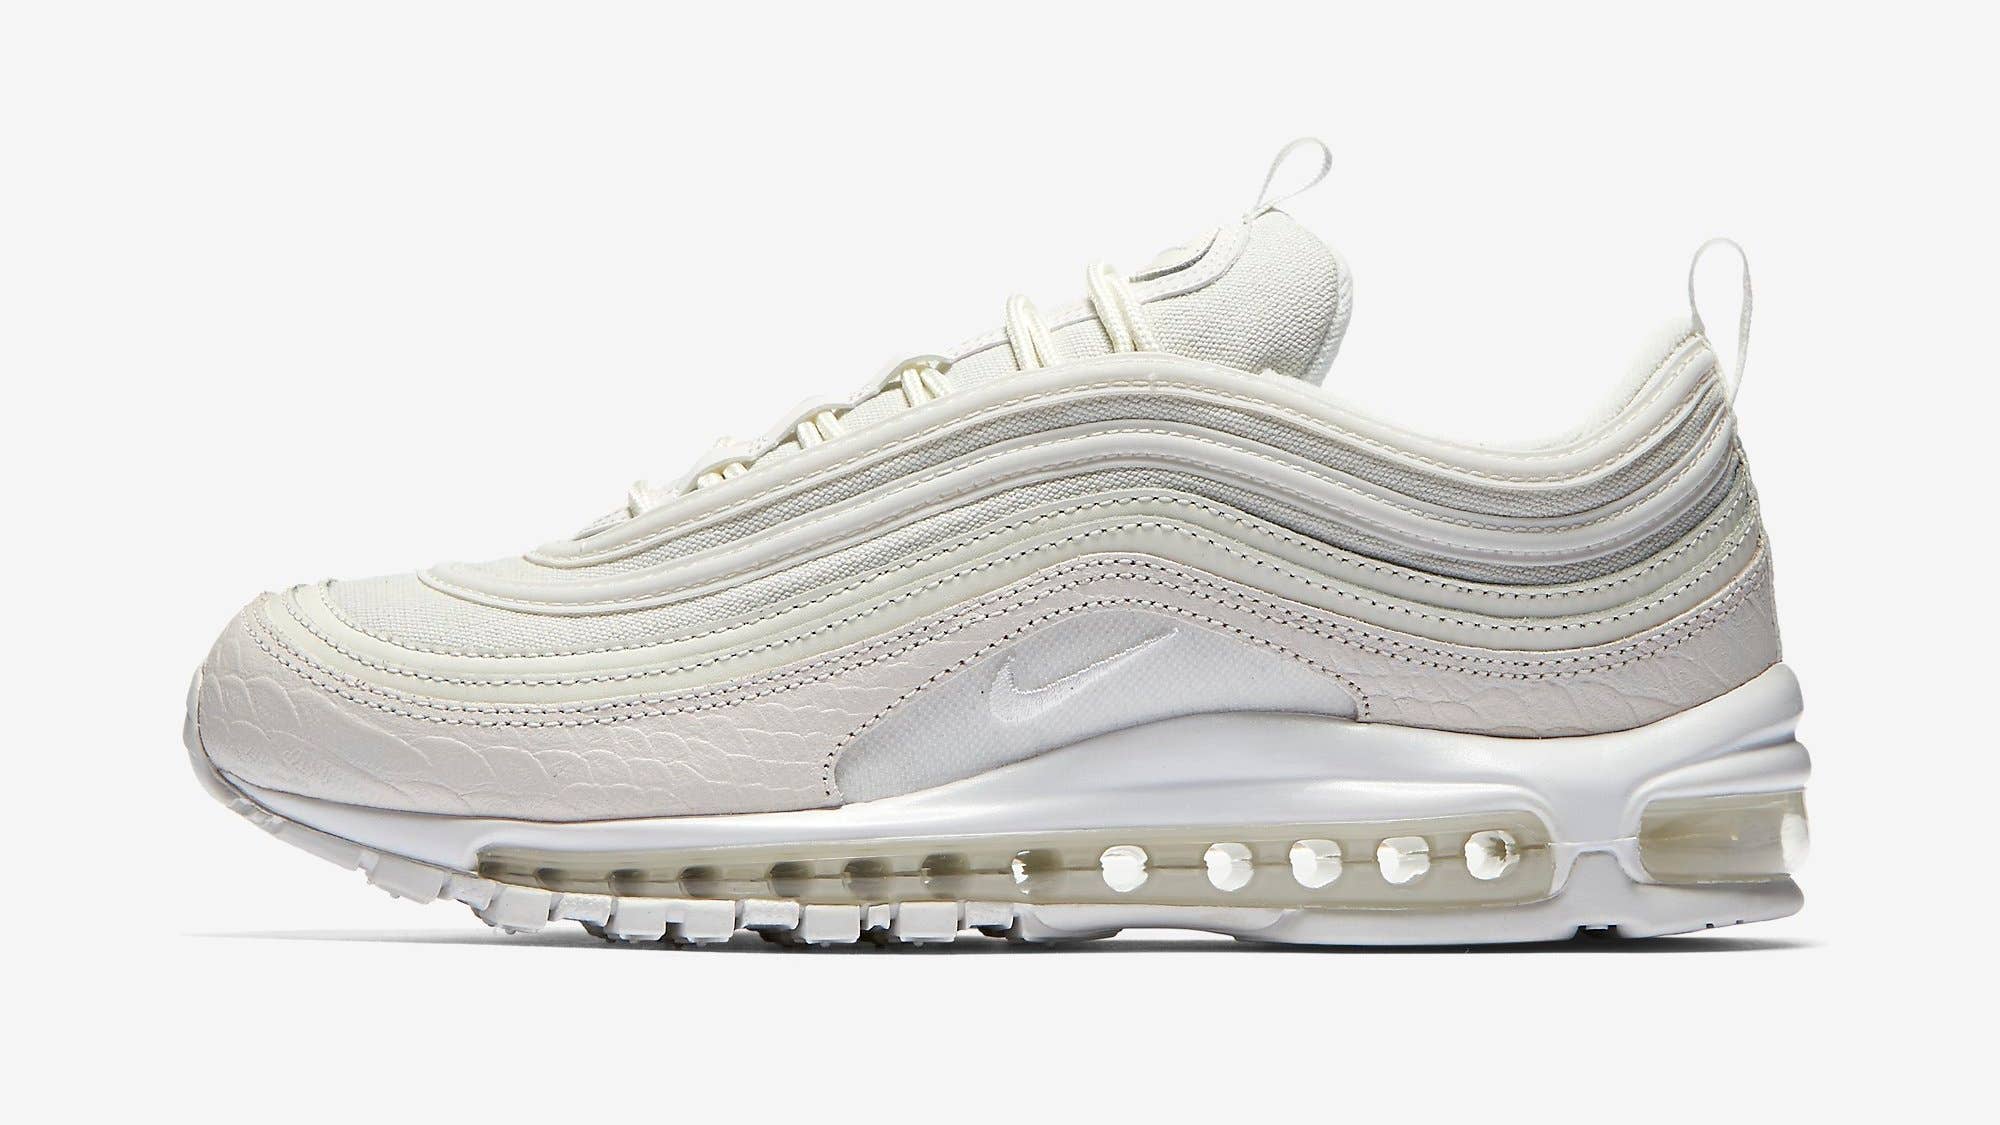 Snakeskin' Air Max 97s Are Complex